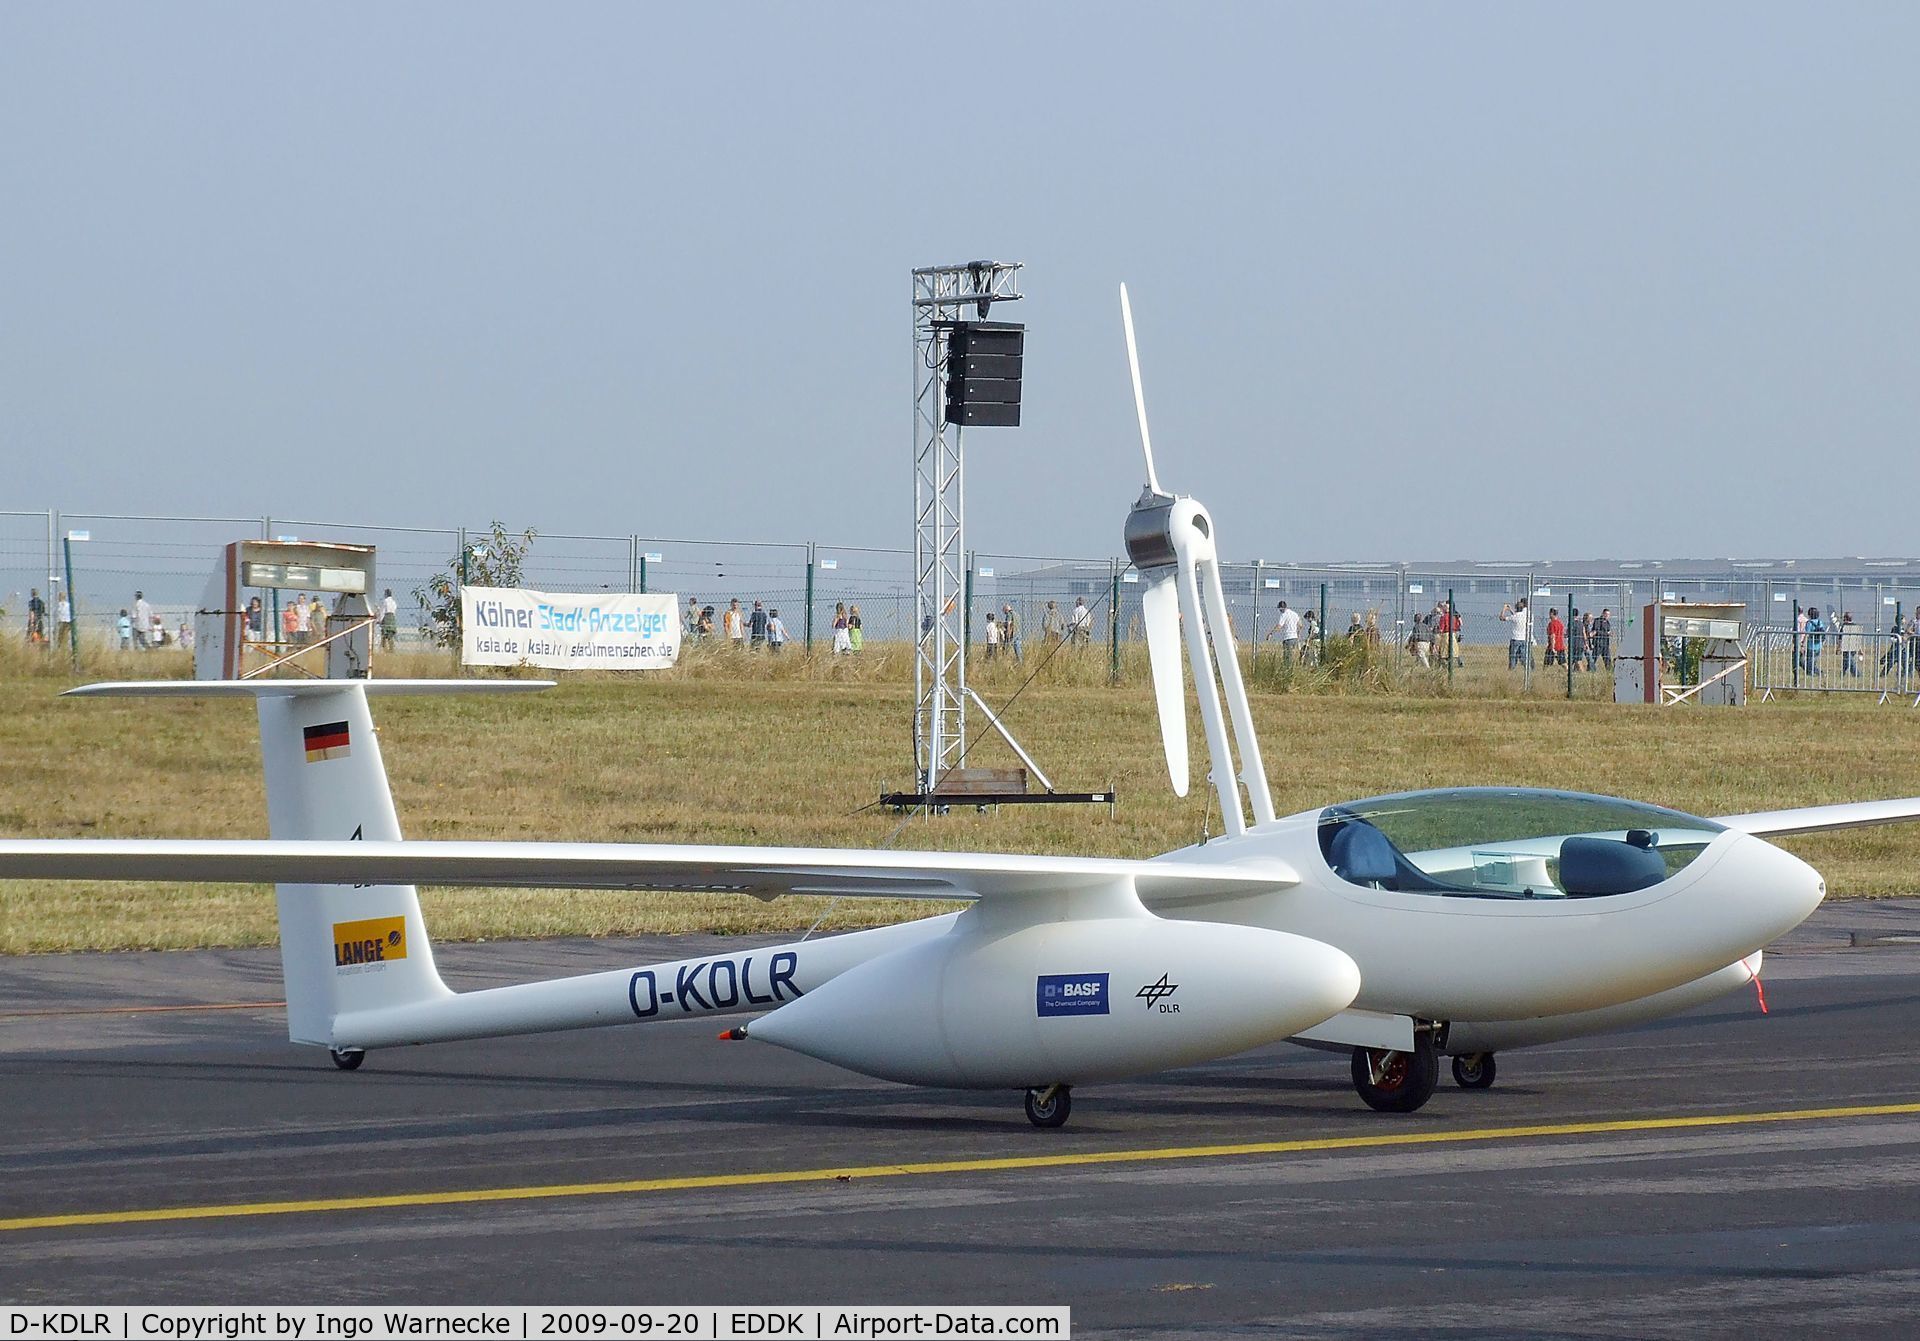 D-KDLR, 2008 Lange E-1 Antares DLR-H2 C/N 01, DLR / Lange Aviation Antares DLR-H2 fuel cell/hydrogen powered electric aircraft of the DLR at the DLR 2009 air and space day on the side of Cologne airport